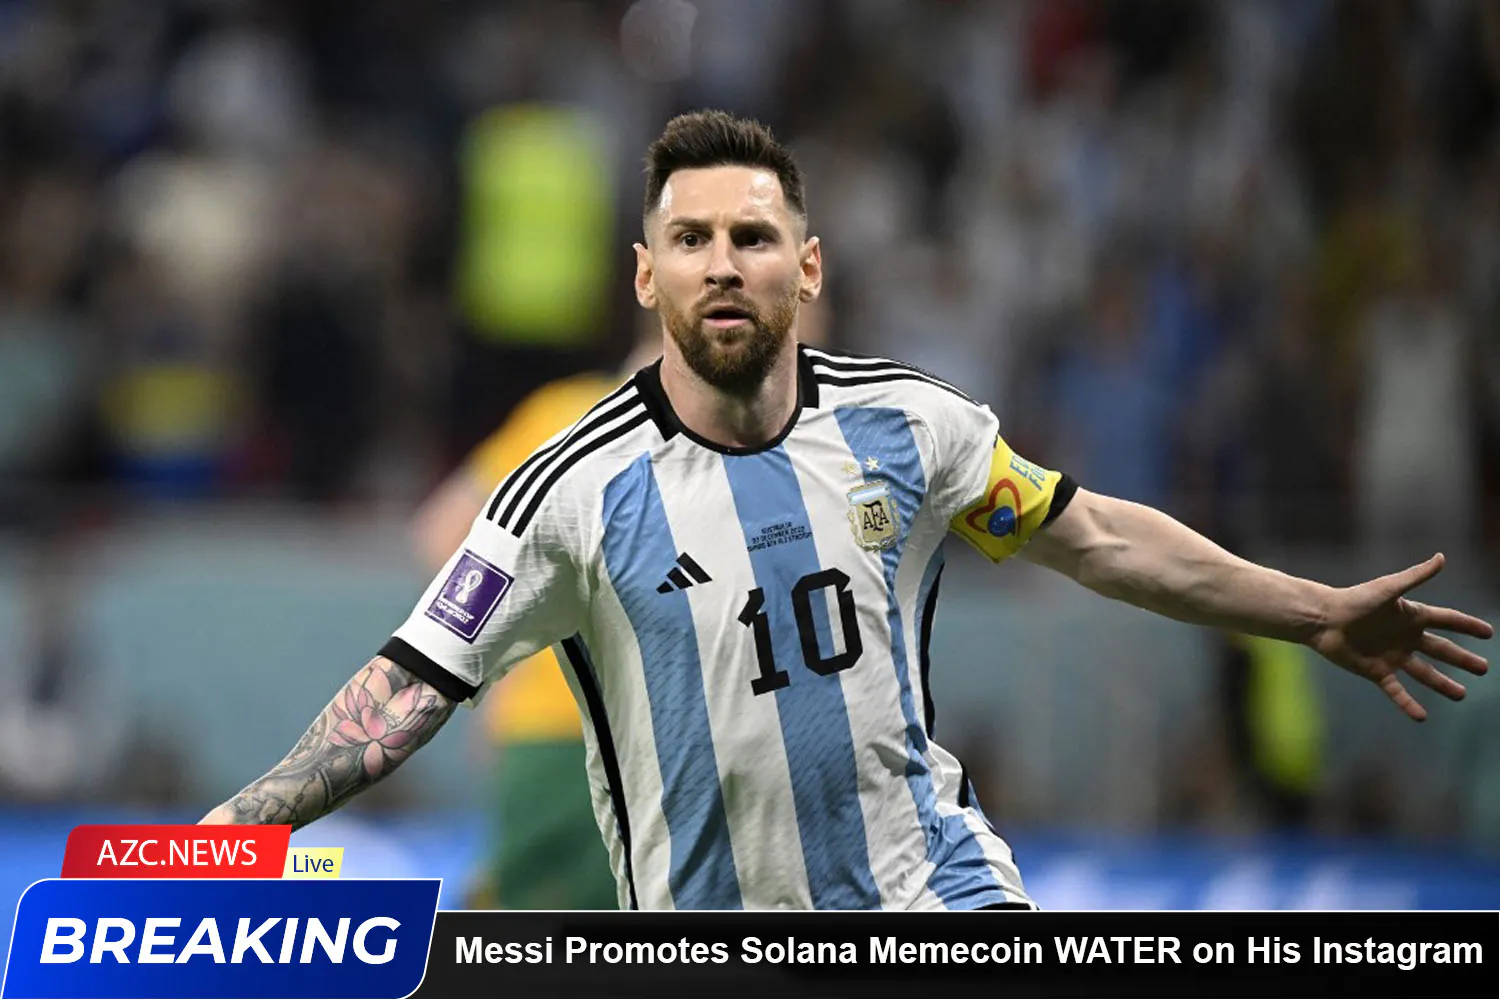 Messi Promotes Solana Memecoin Water On His Instagram